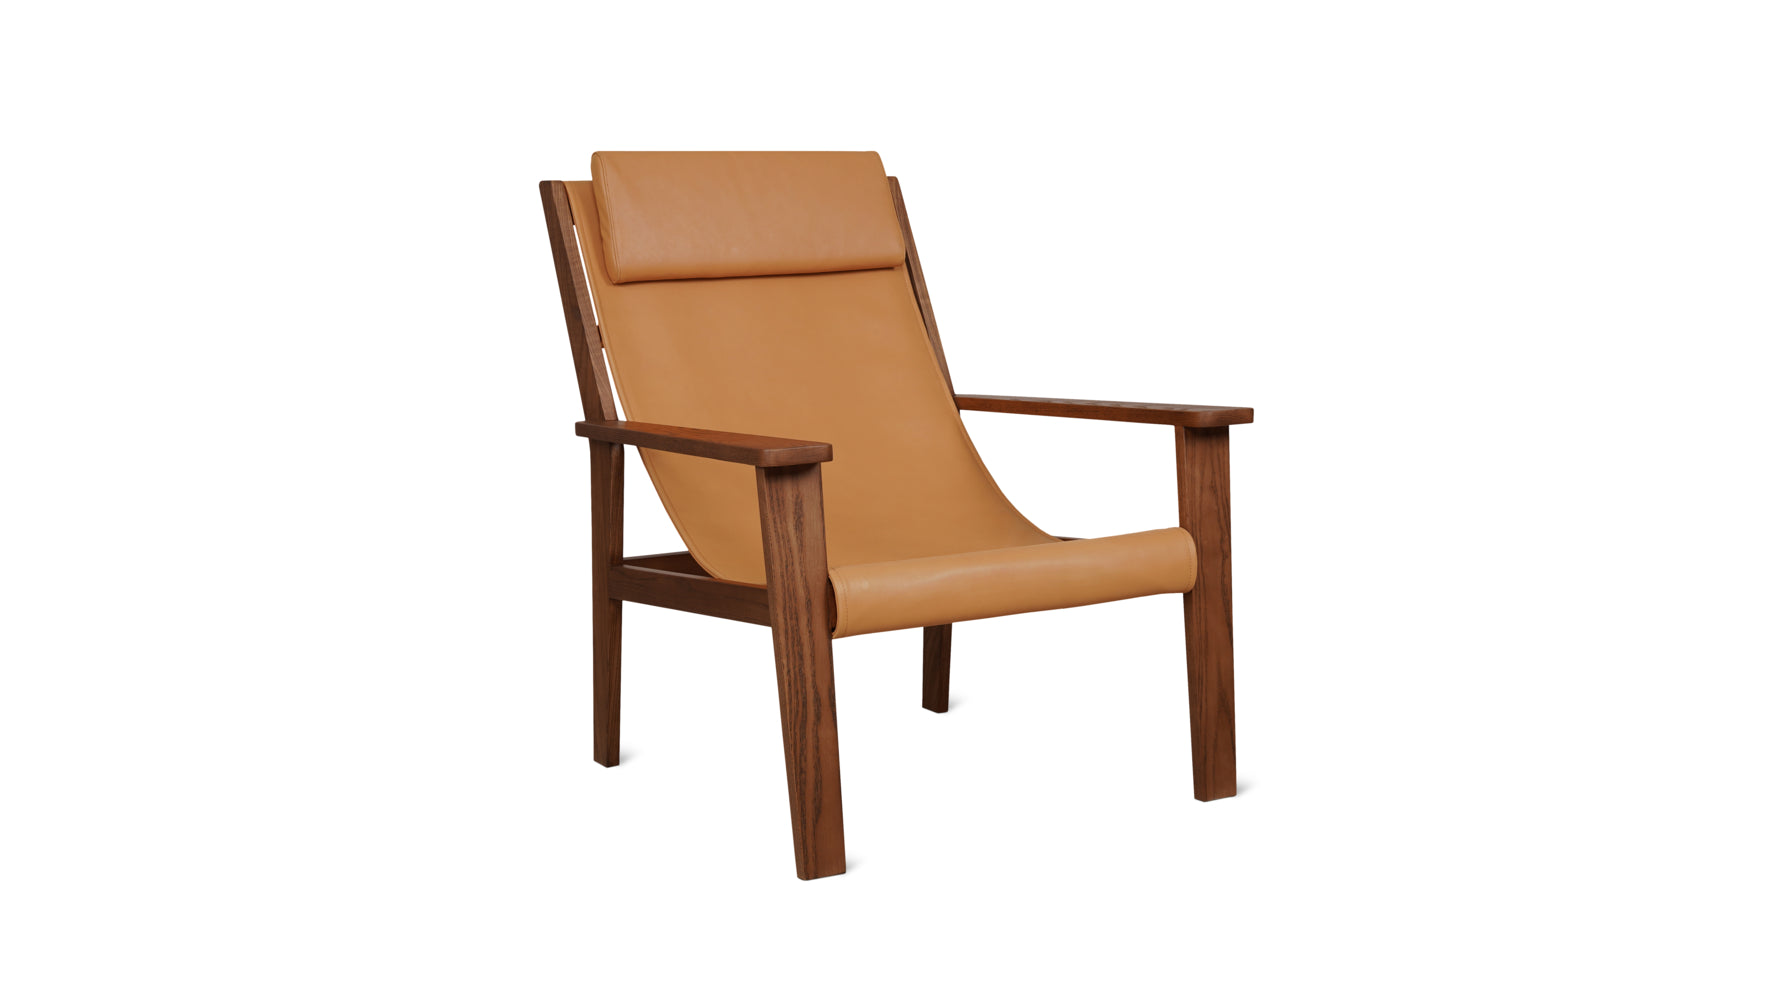 Sweet Life Sling Lounge Chair With Headrest, Terracotta Walnut - Image 2